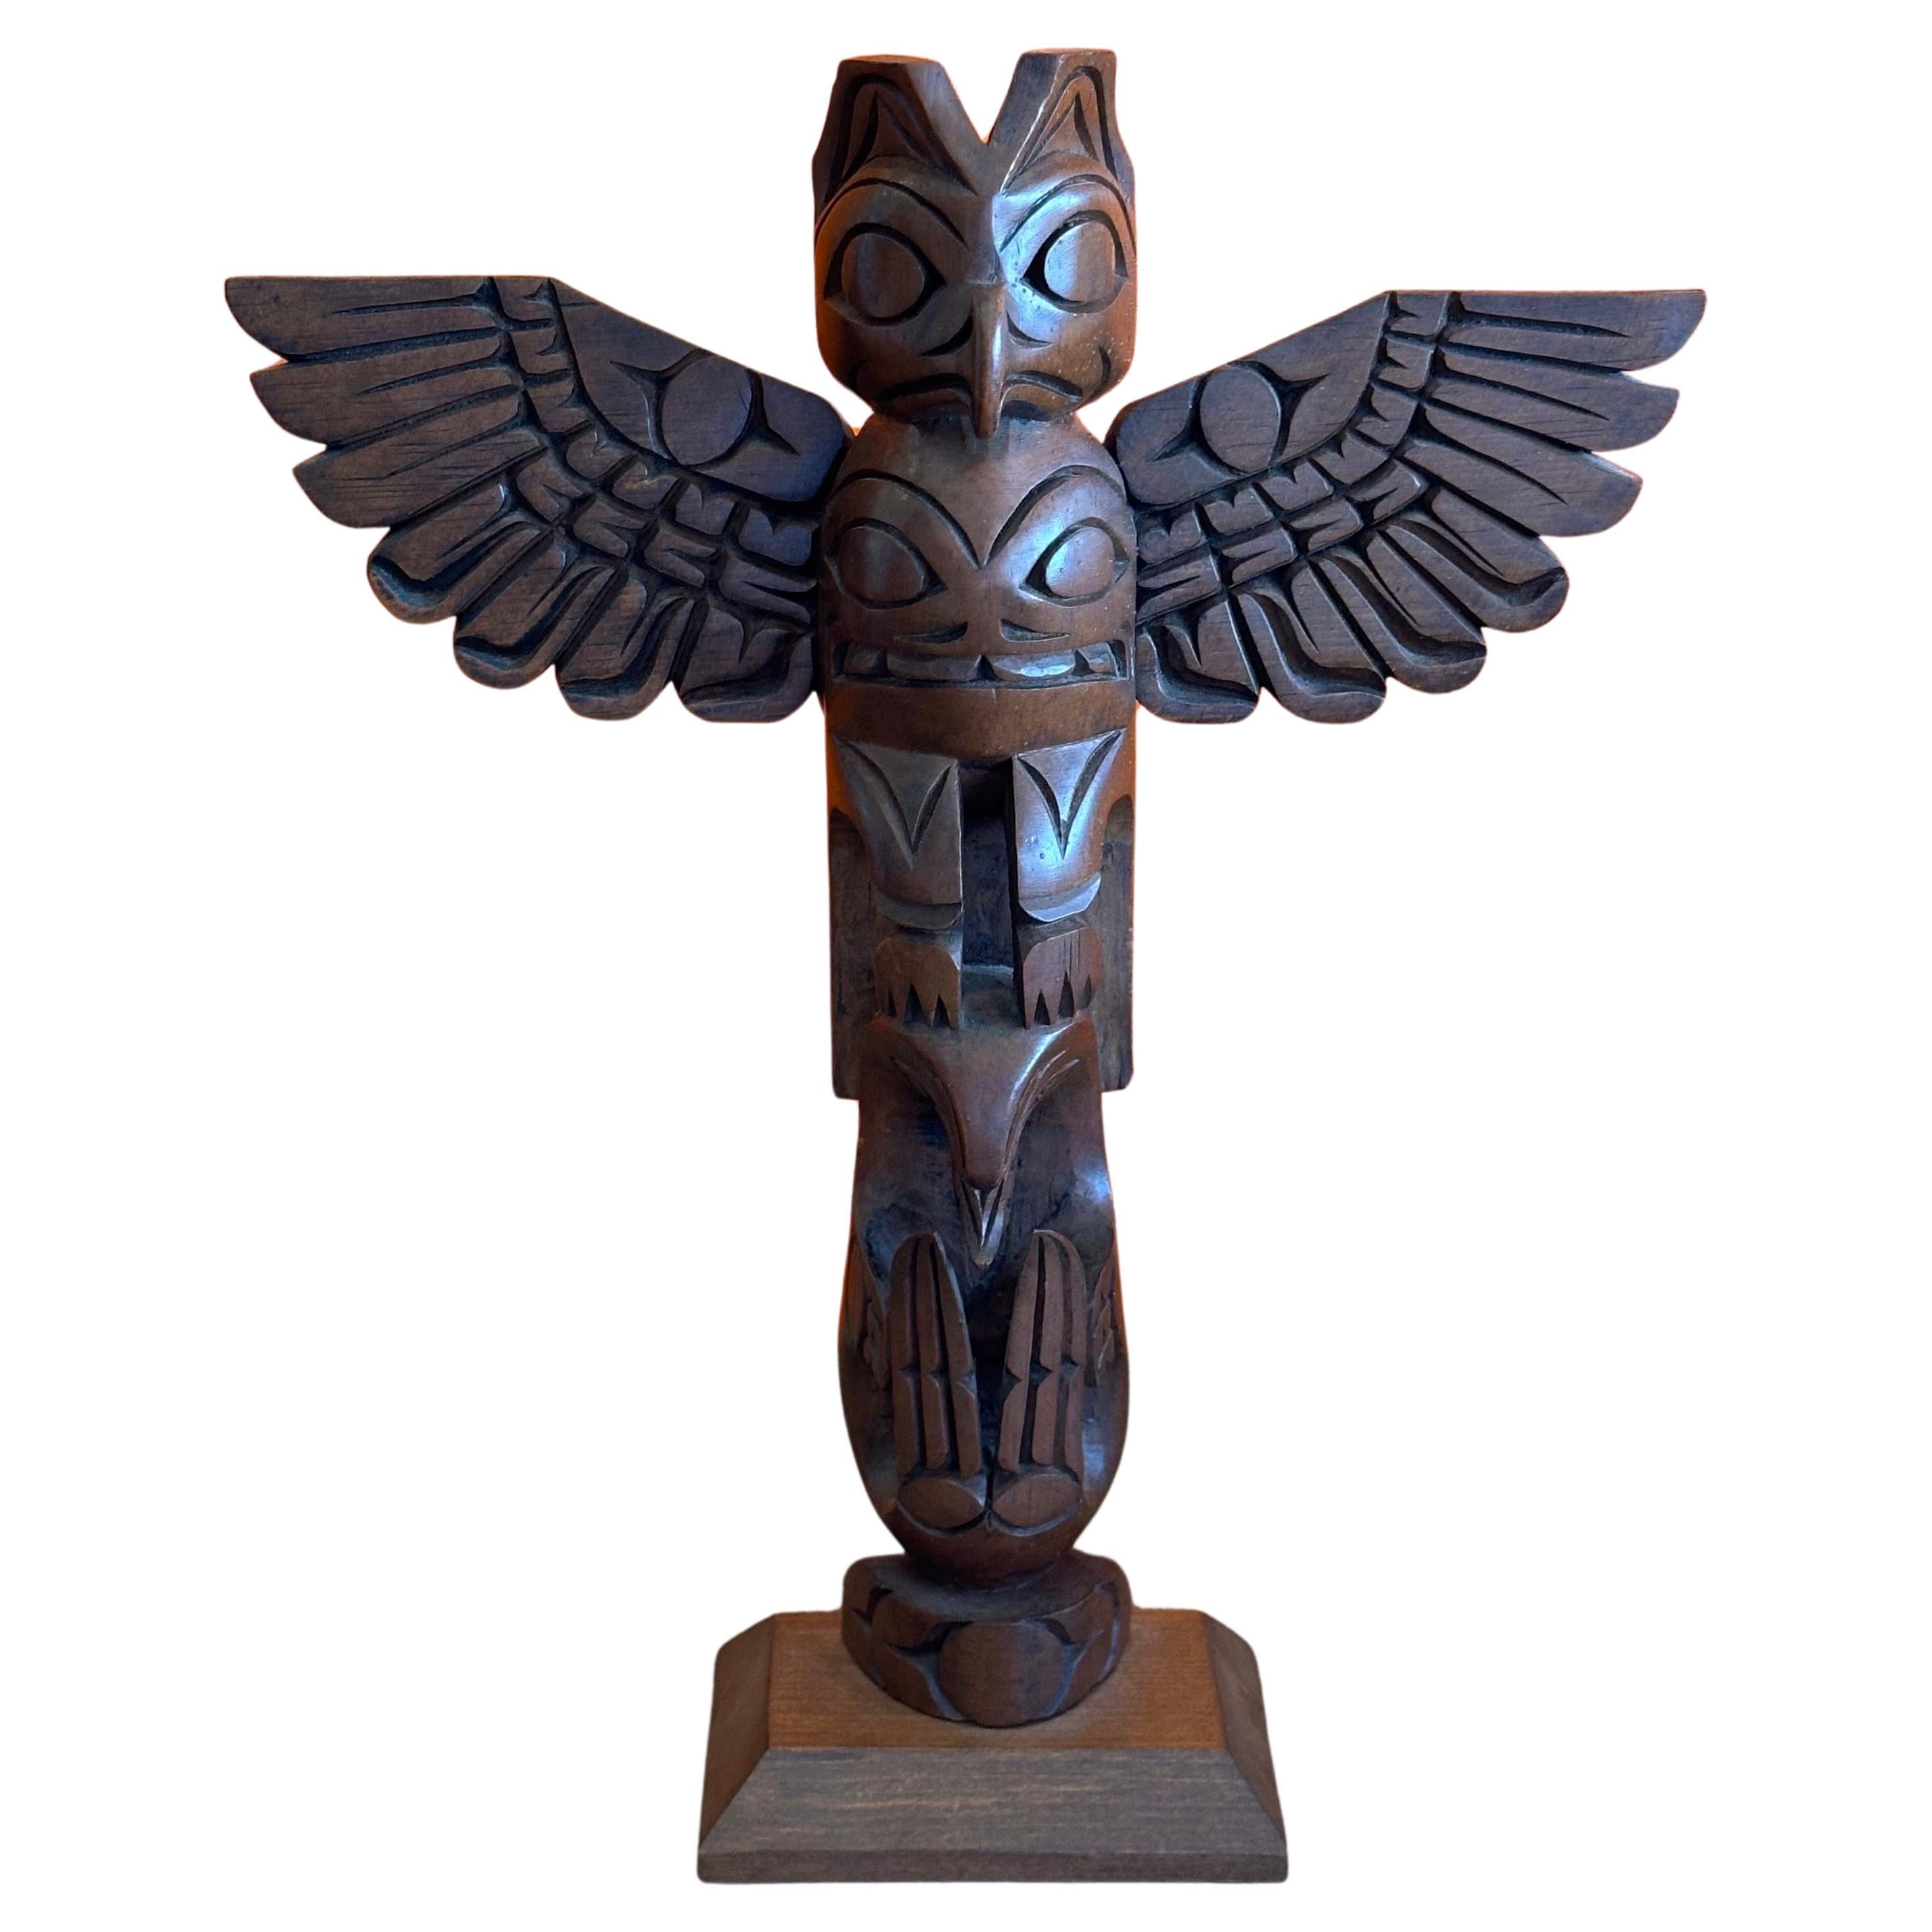 A fine example of a Nuu-chah-nulth northwest coast hand carved wood TOTEM pole by master carver John Williams, circa 1980s. Williams was the son of famed carver, Ray Williams, and Grandson to Sam Williams who started carving for the 